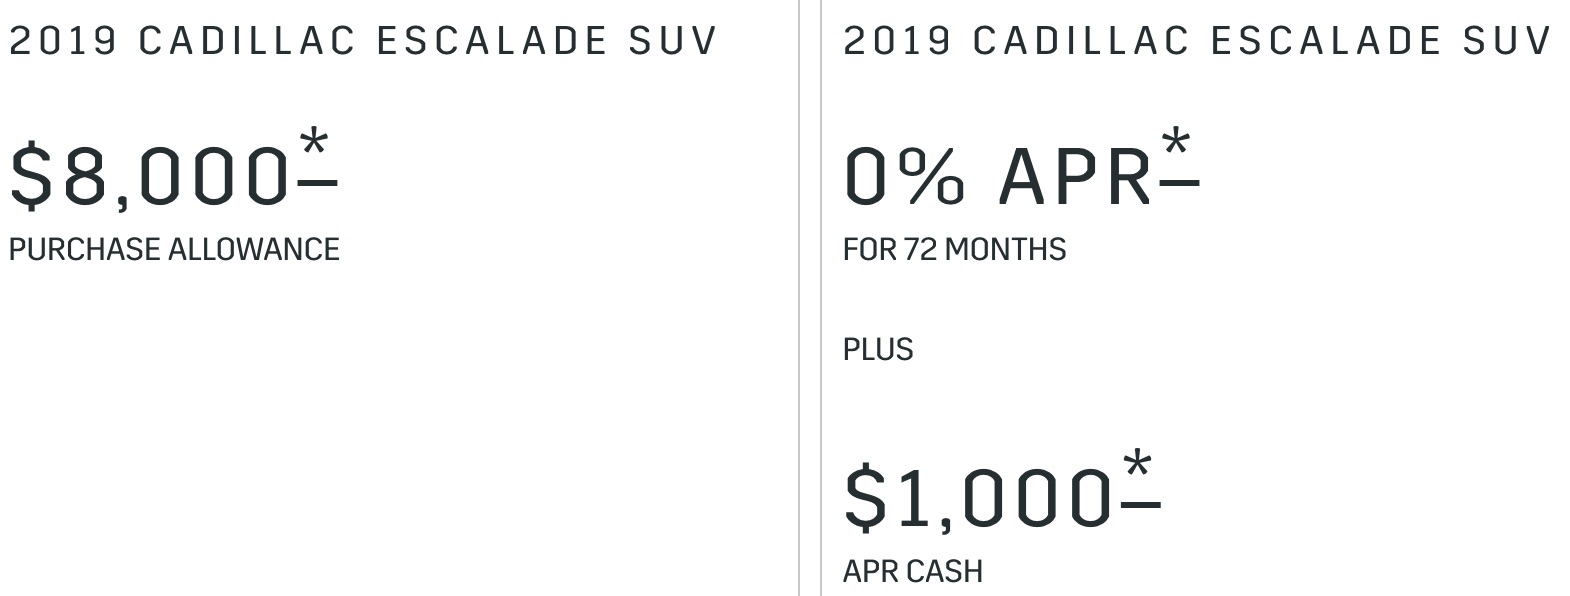 cadillac-rebate-reduces-escalade-price-by-8-000-in-august-2019-gm